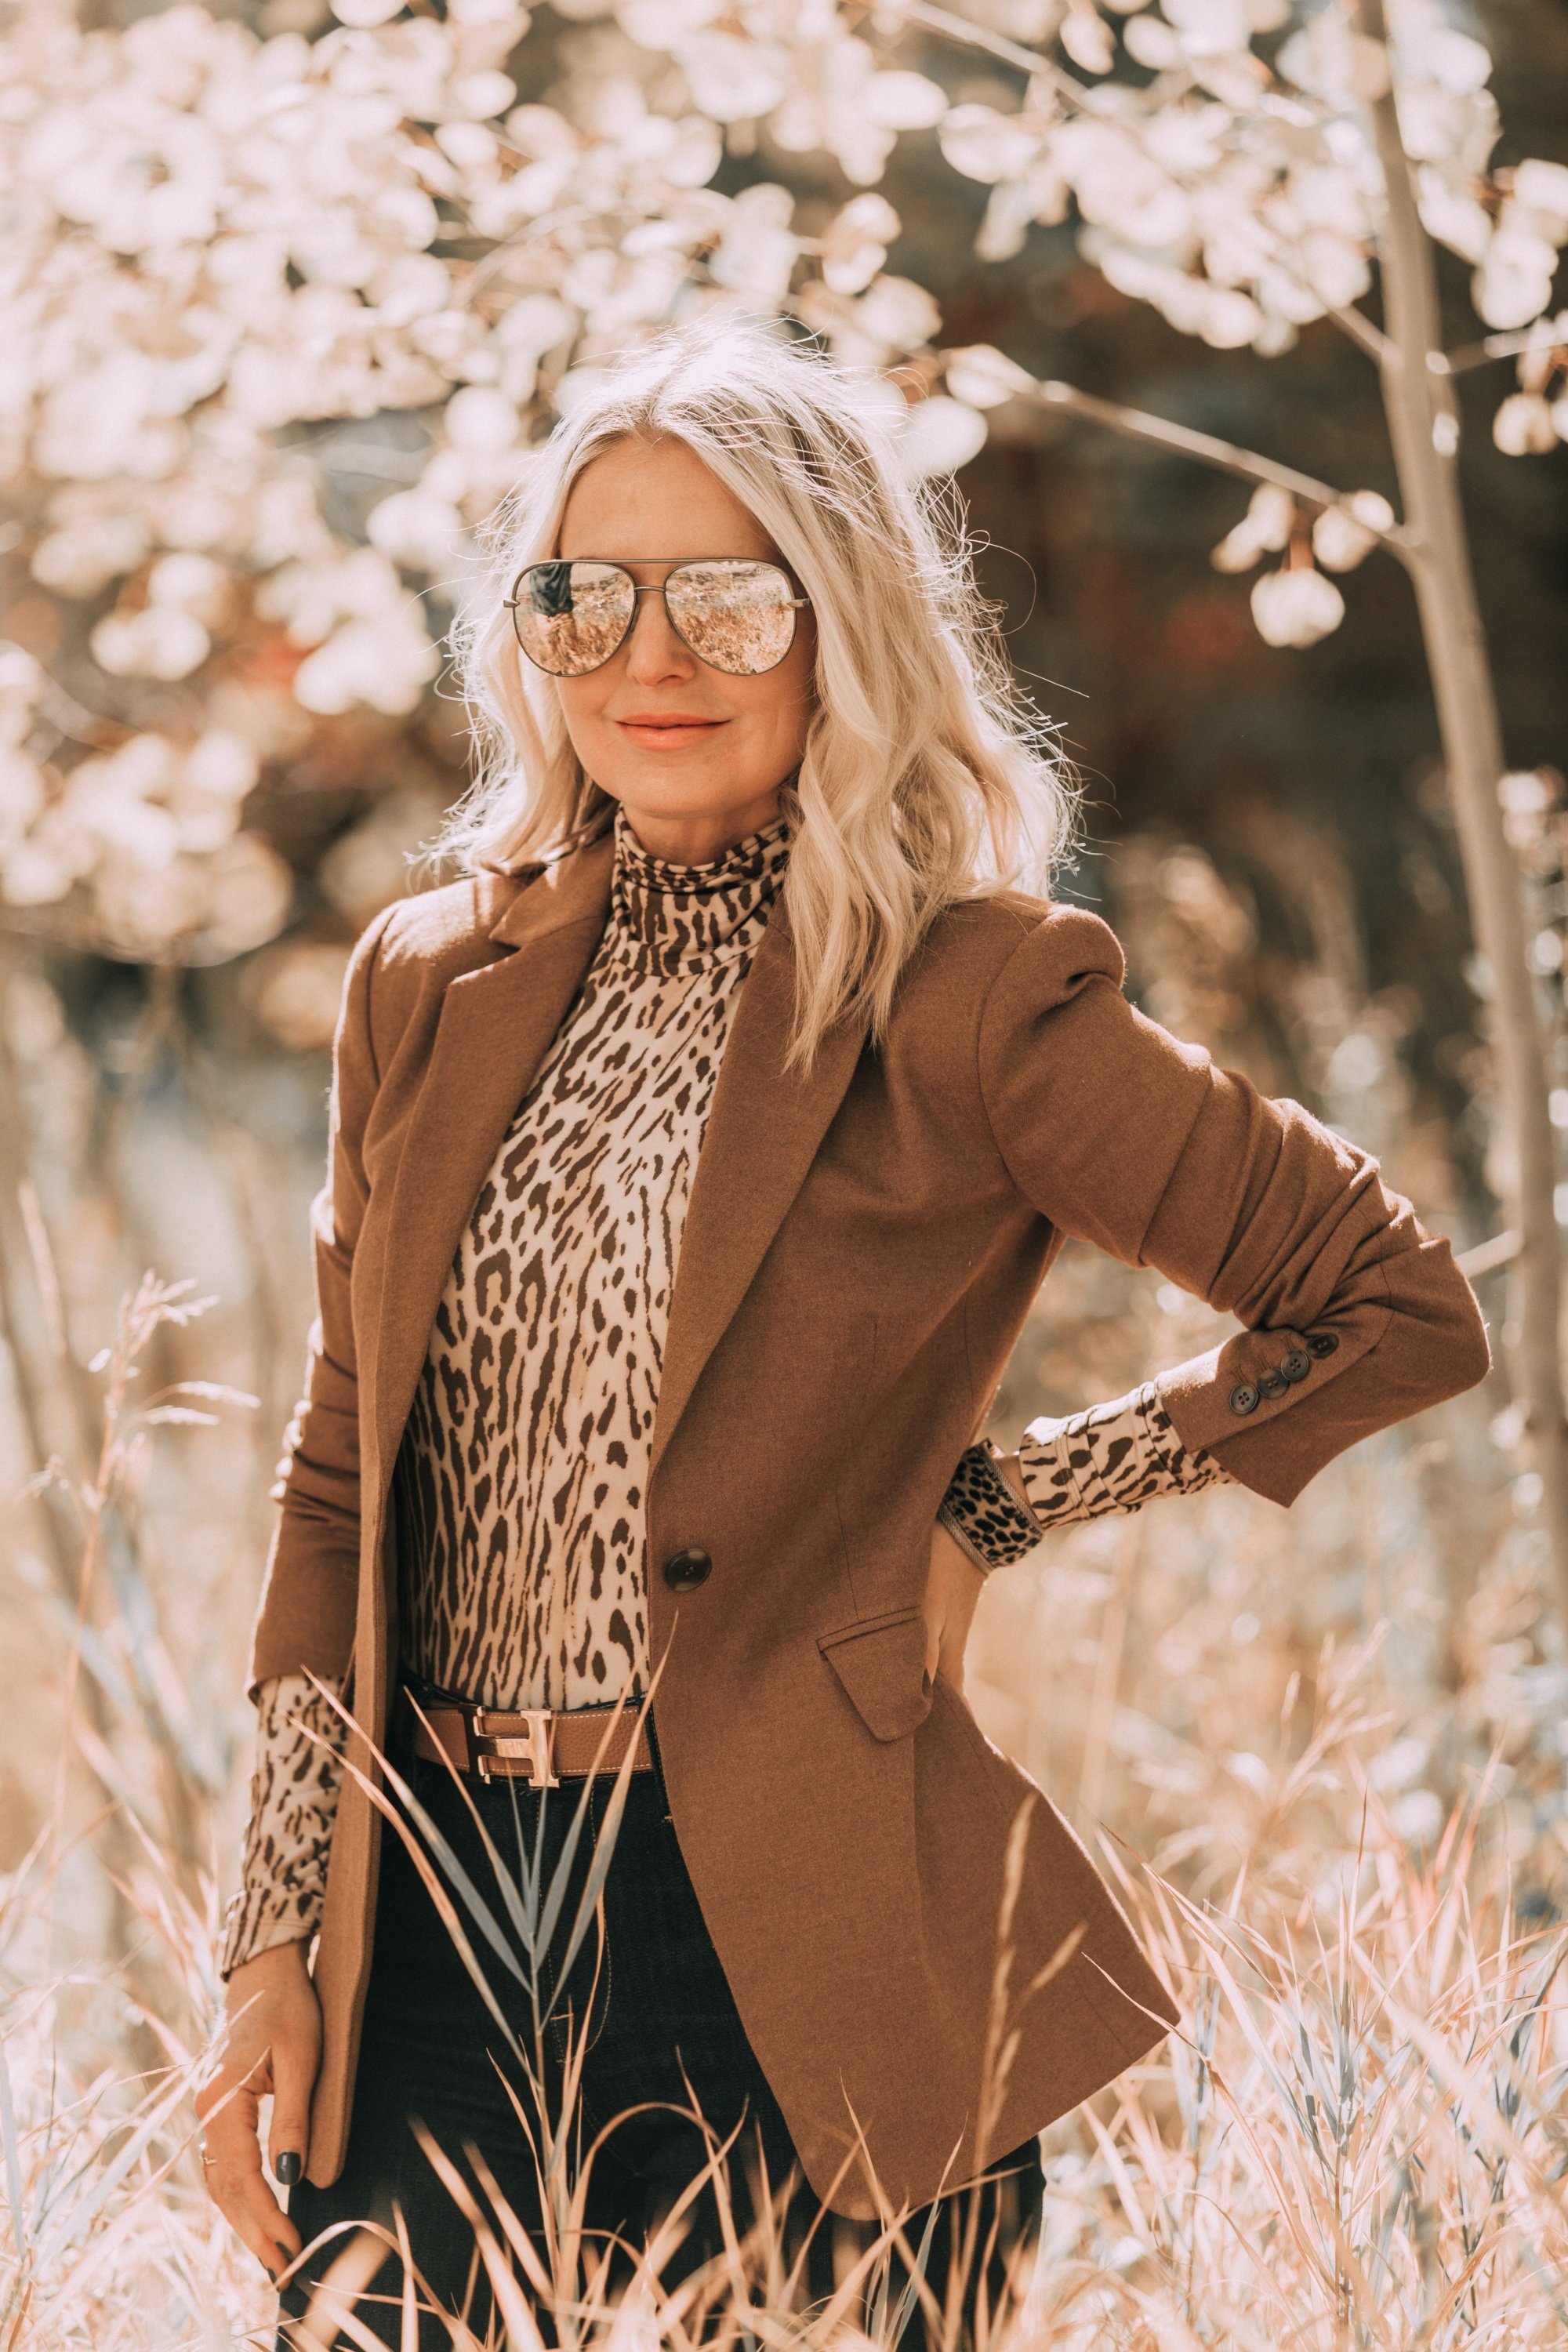 Neutral Fall Outfit, Fashion blogger Erin Busbee of BusbeeStyle.com wearing the camel brown Nordstrom signature blazer with a Zimmerman leopard print turtleneck, rag & bone skinny jeans, Sam Edelman knee high suede boots, and hermes belt in Telluride, CO